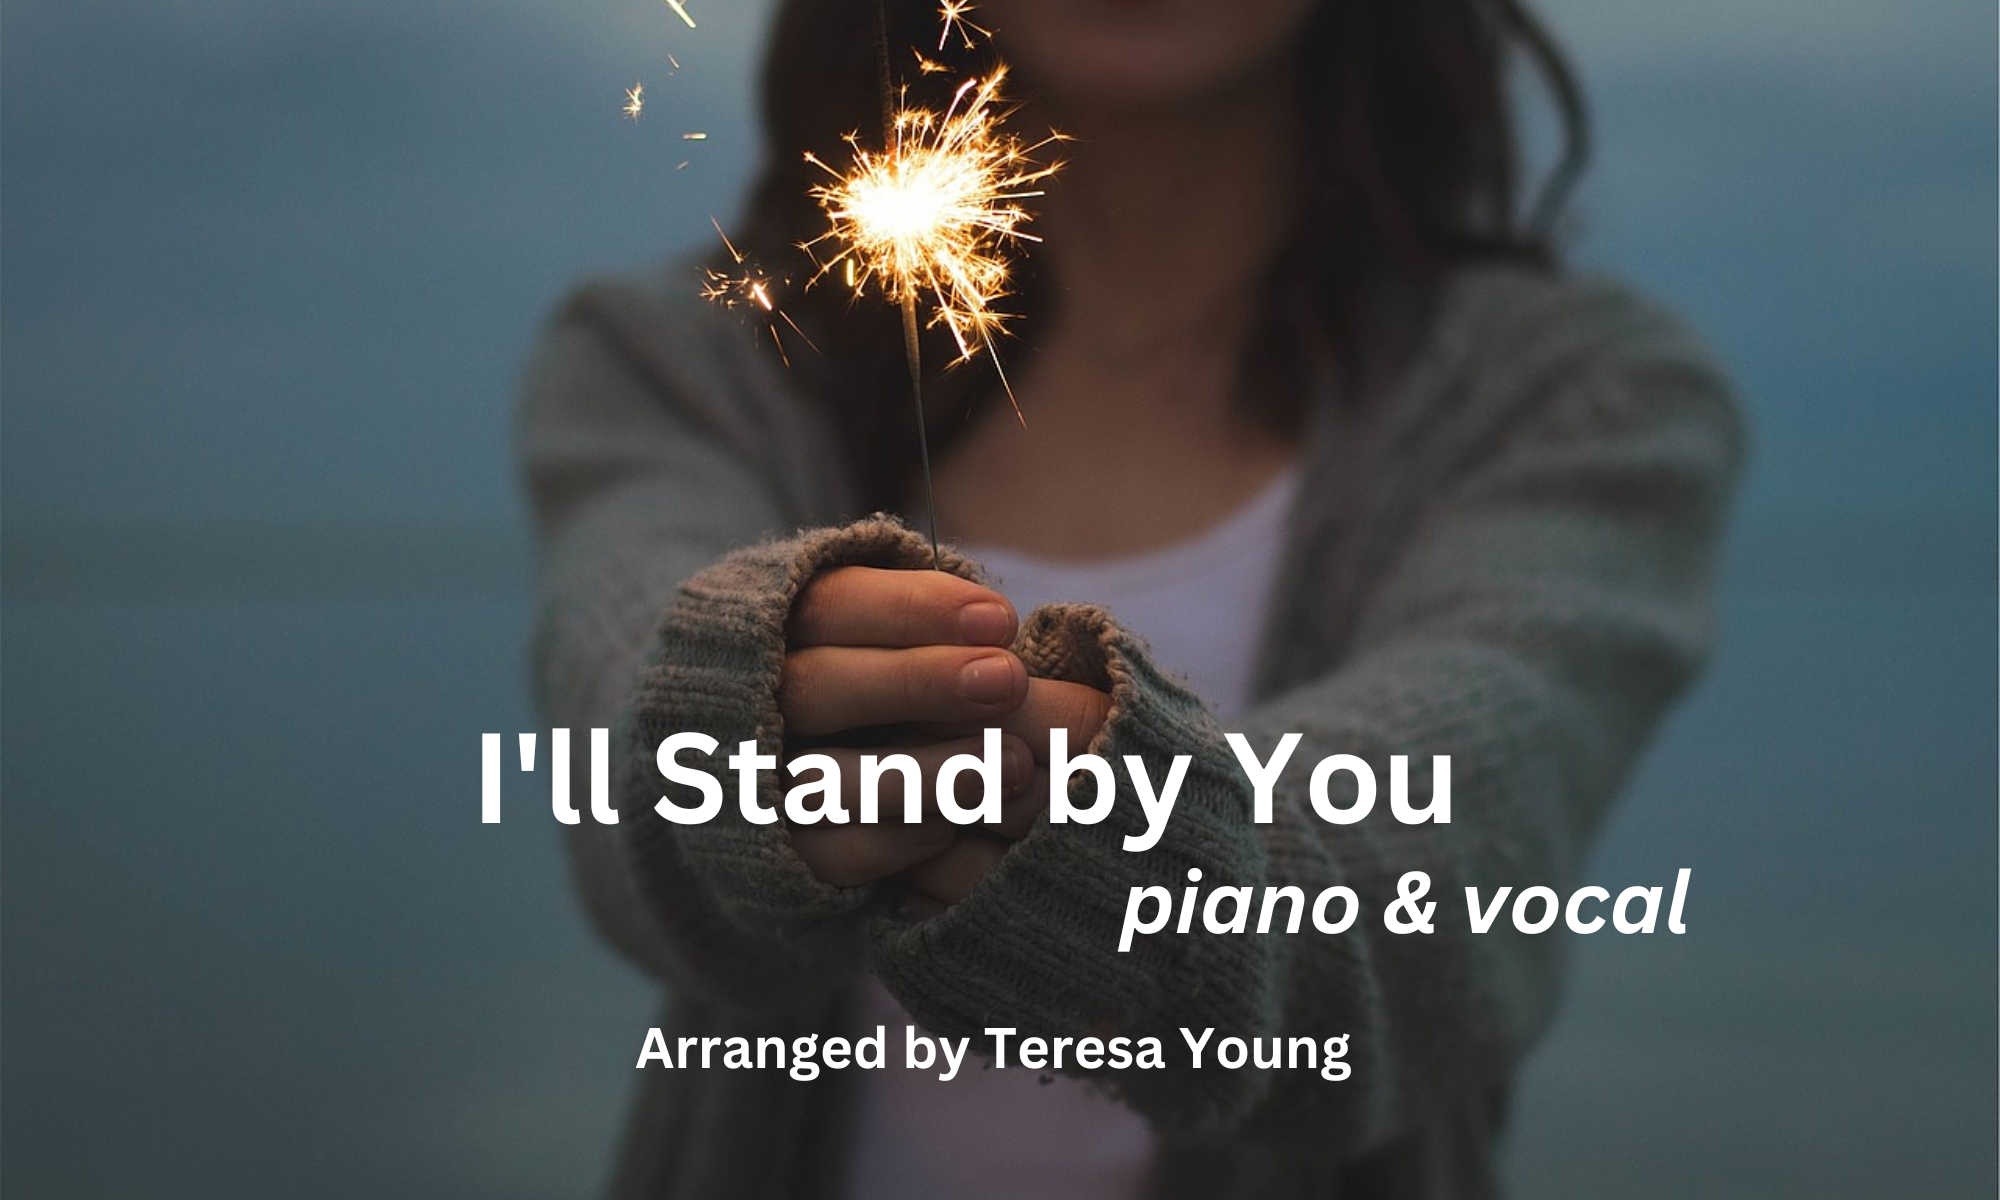 I'll Stand by You, piano & vocal, arr. Teresa Young